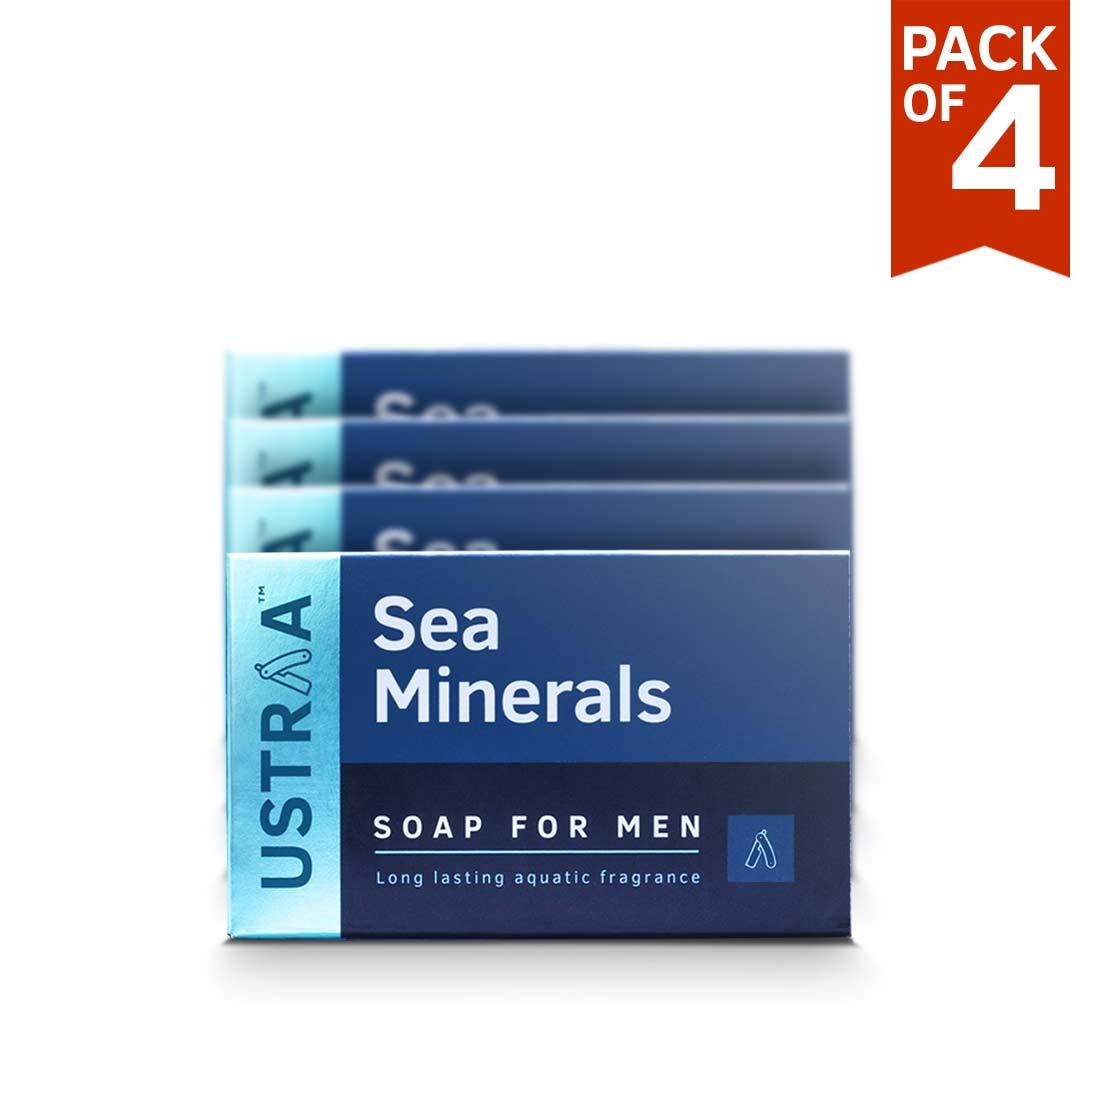 Ustraa Refreshing Deo Soap For Men (Pack of 4, 100g): With Sea Mineral 